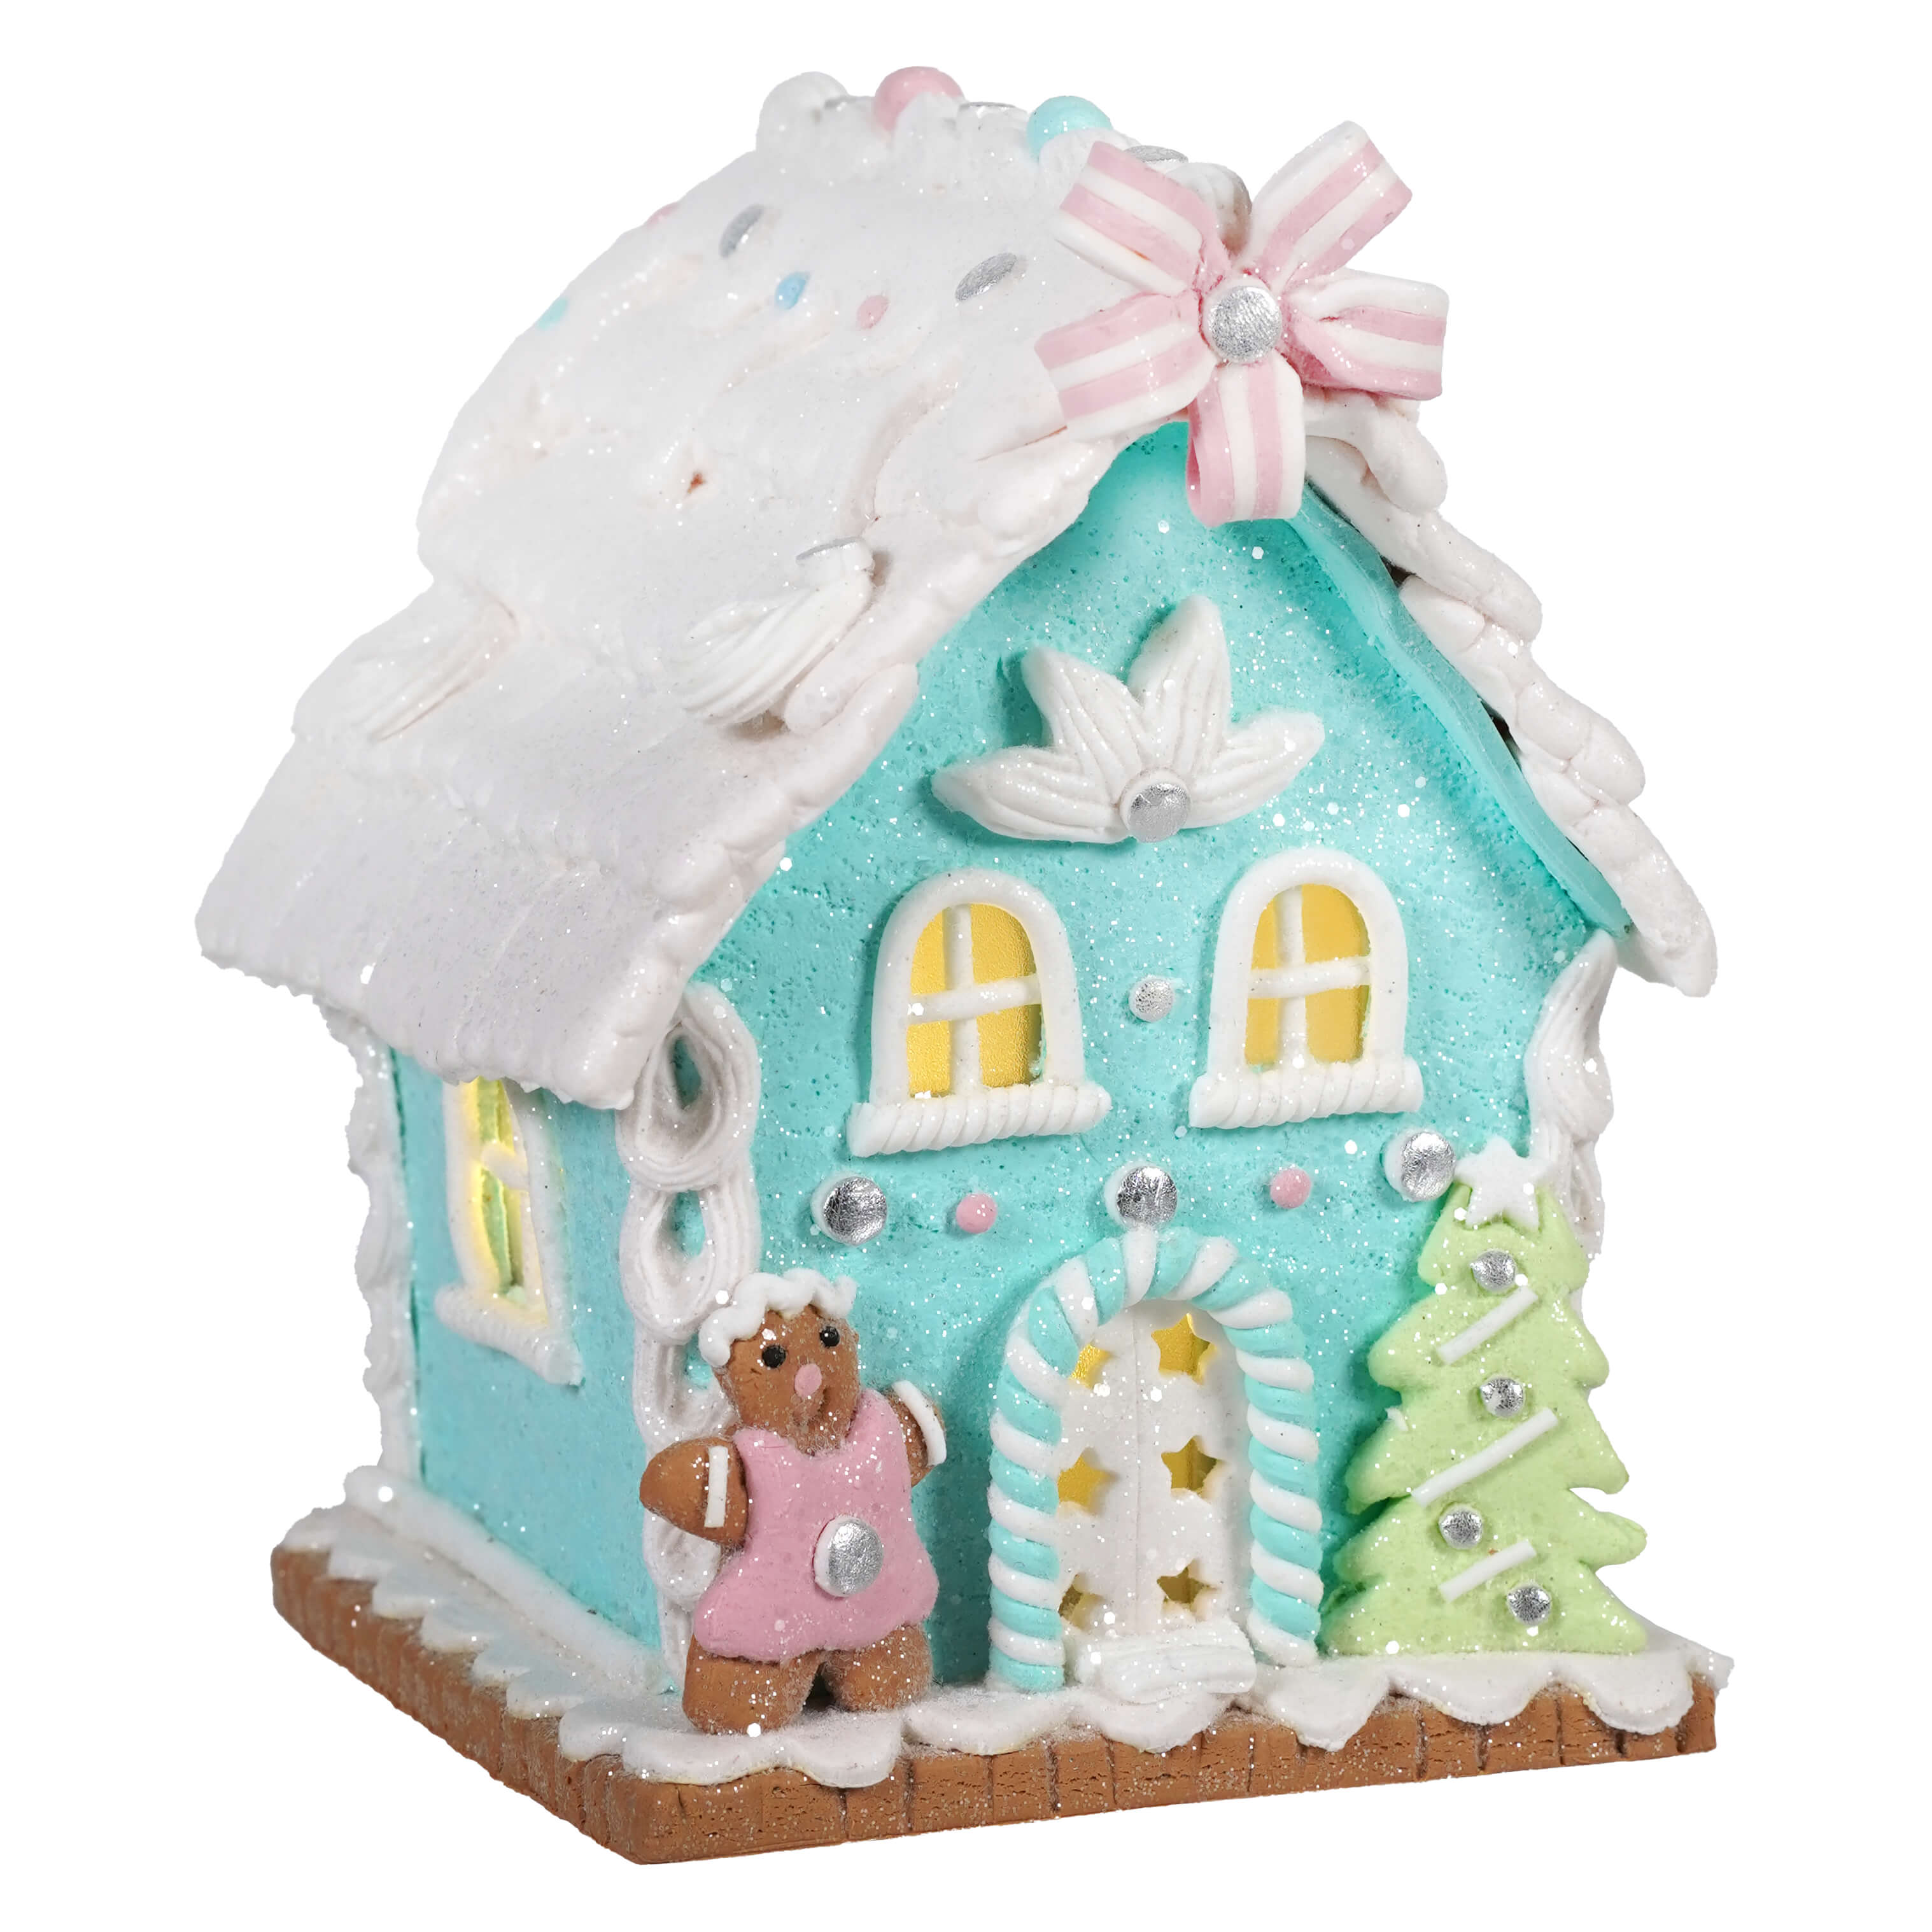 Gingerbread Woman Teal Lighted Gingerbread House